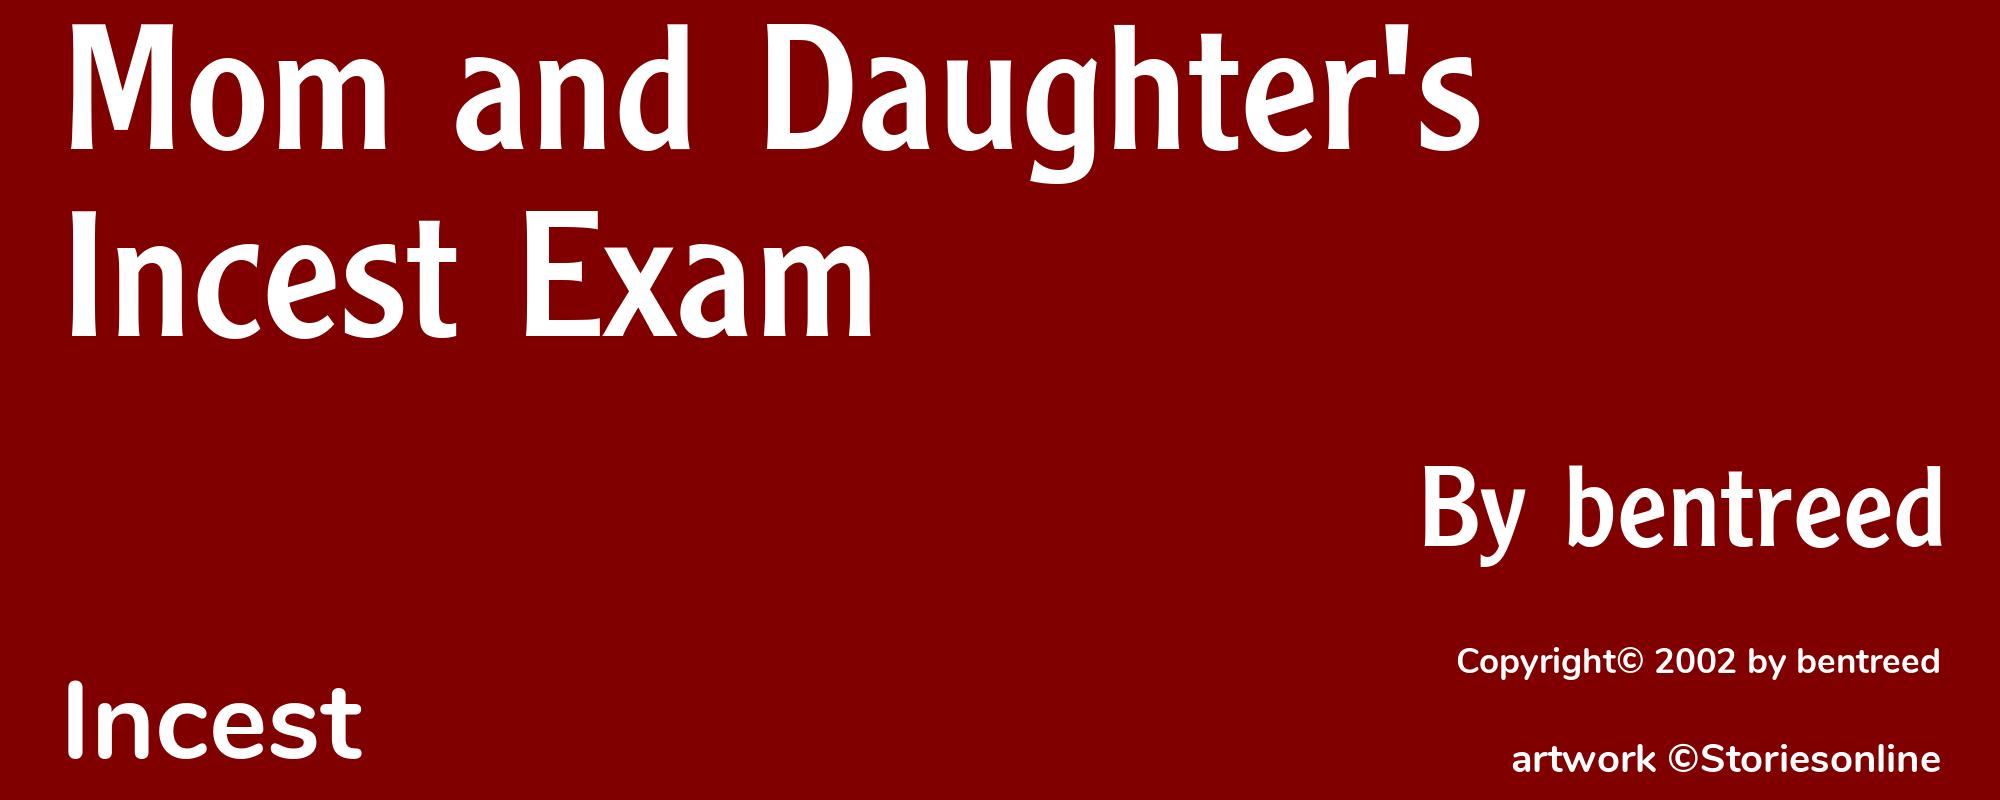 Mom and Daughter's  Incest Exam - Cover